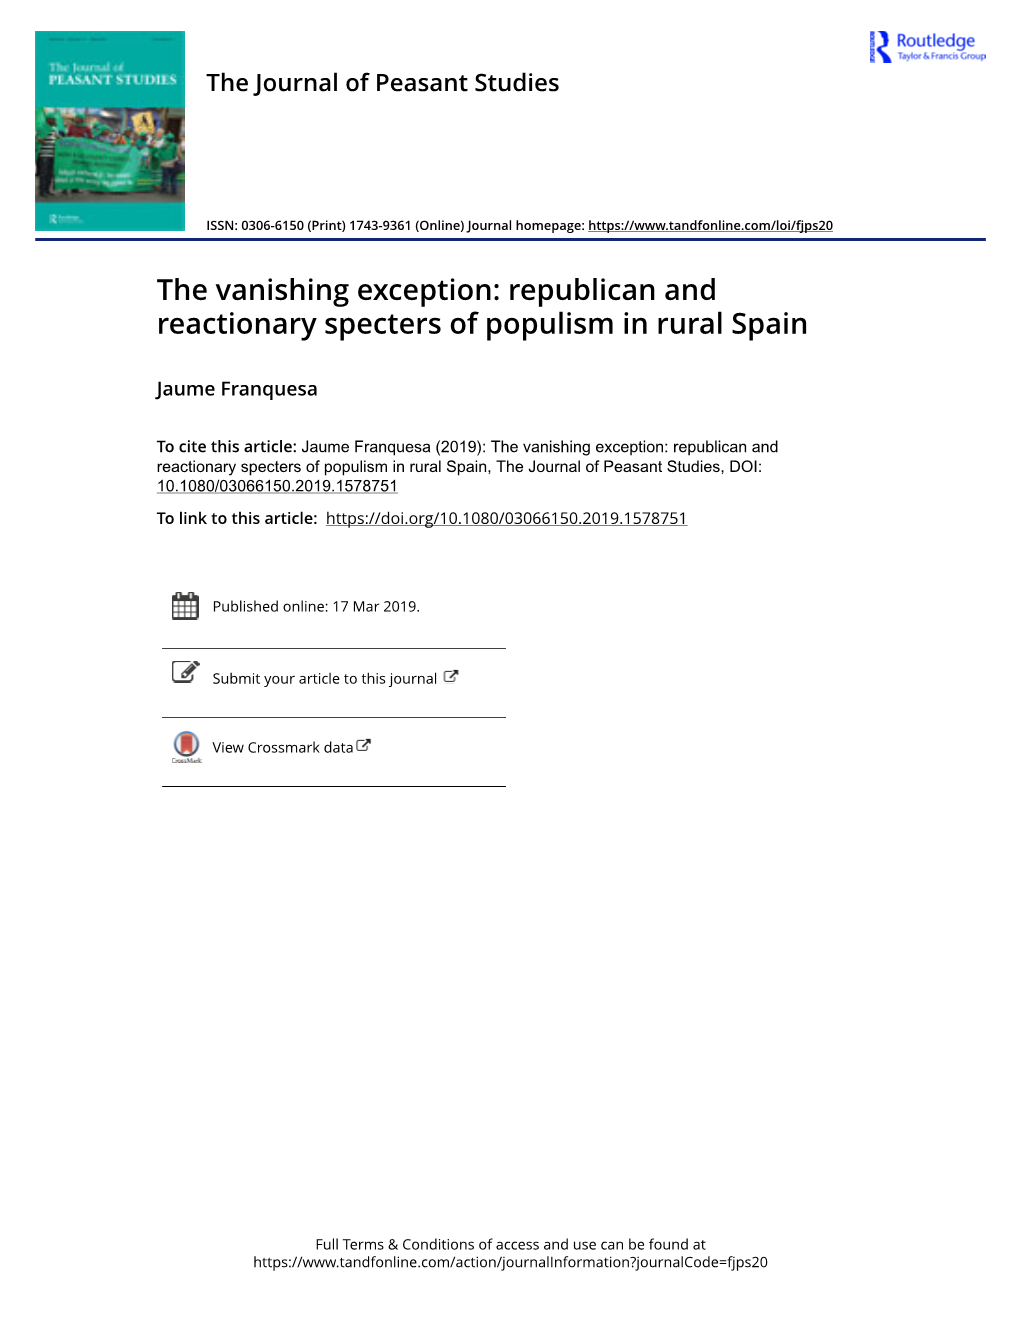 The Vanishing Exception: Republican and Reactionary Specters of Populism in Rural Spain